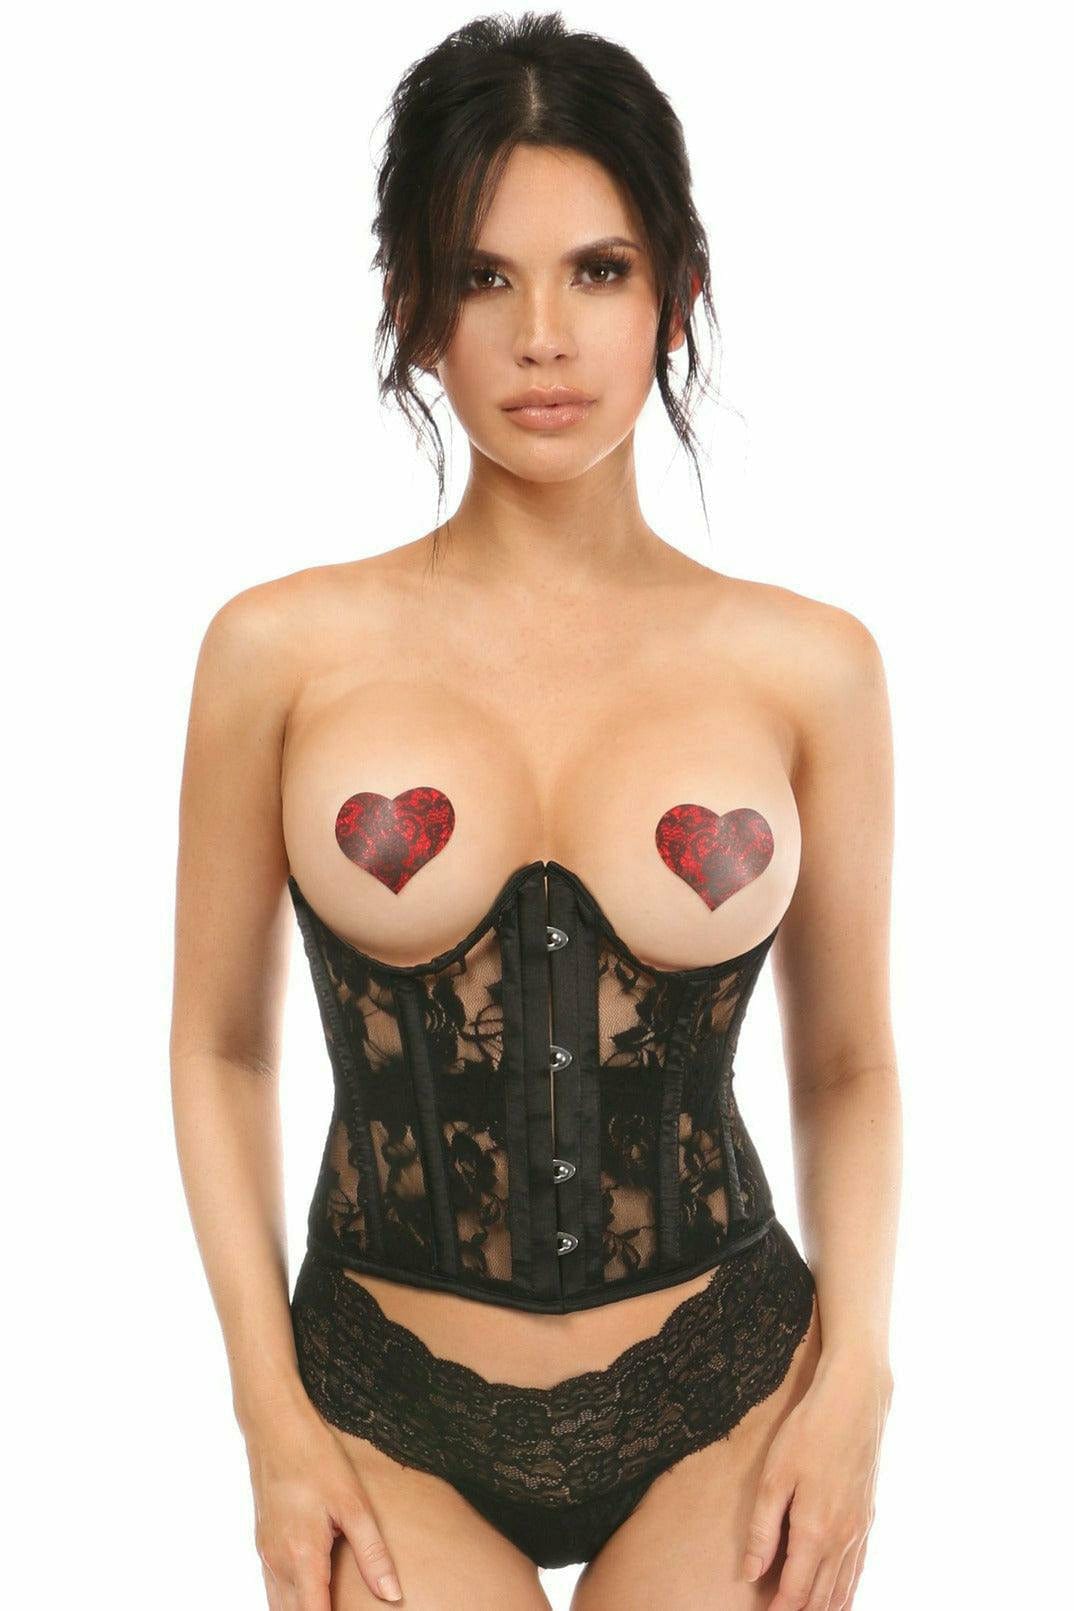 Sexy Sheer Black Lace Open Bust Underwire Short Underbust Corset Musotica.com